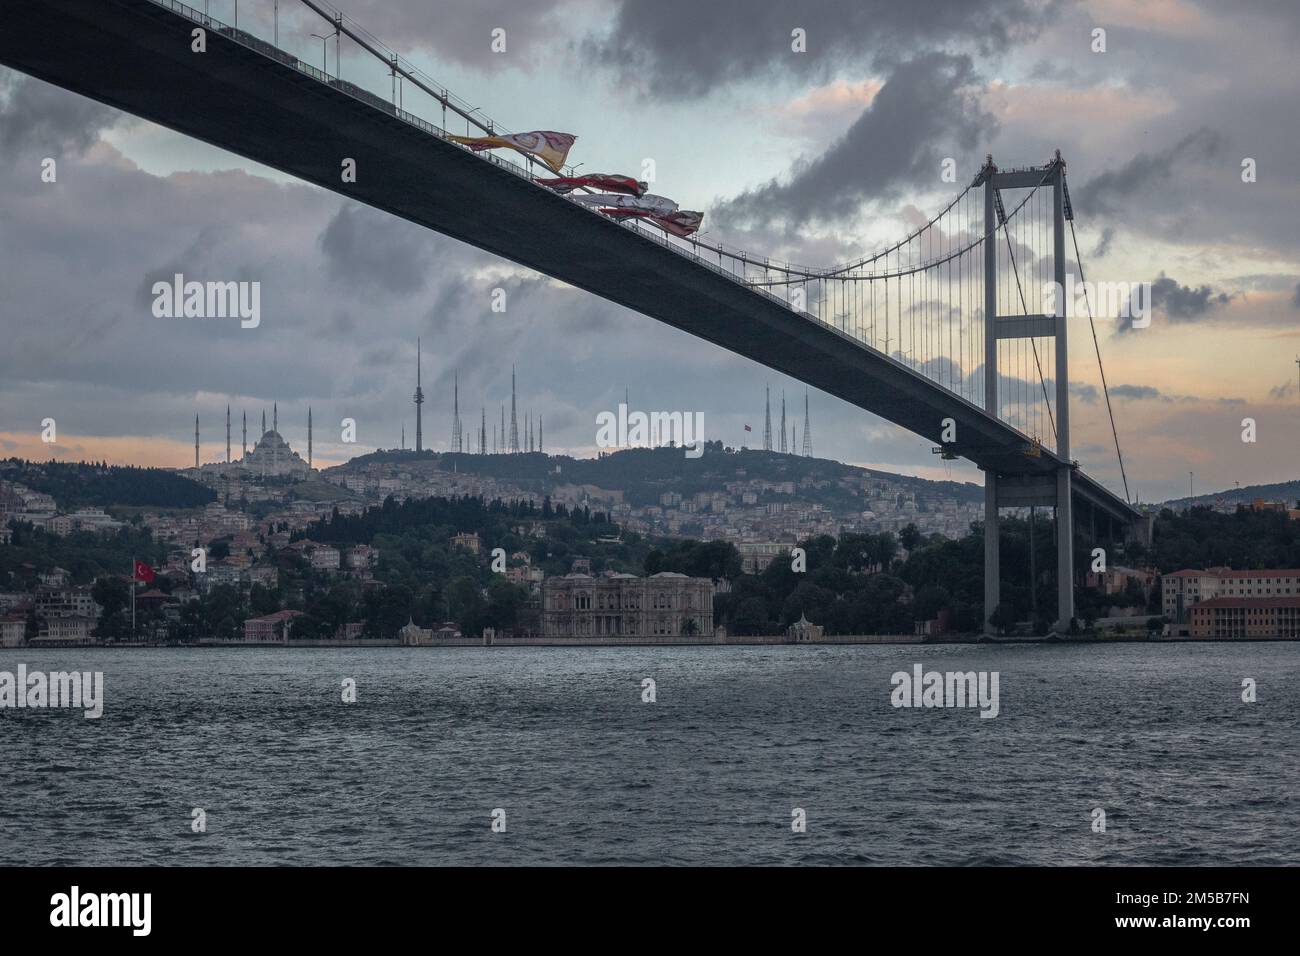 A low-angle shot of The 15 July Martyrs Bridge with steel towers and inclined hangers, in Istanbul, Turkey, with a cityscape in the background Stock Photo